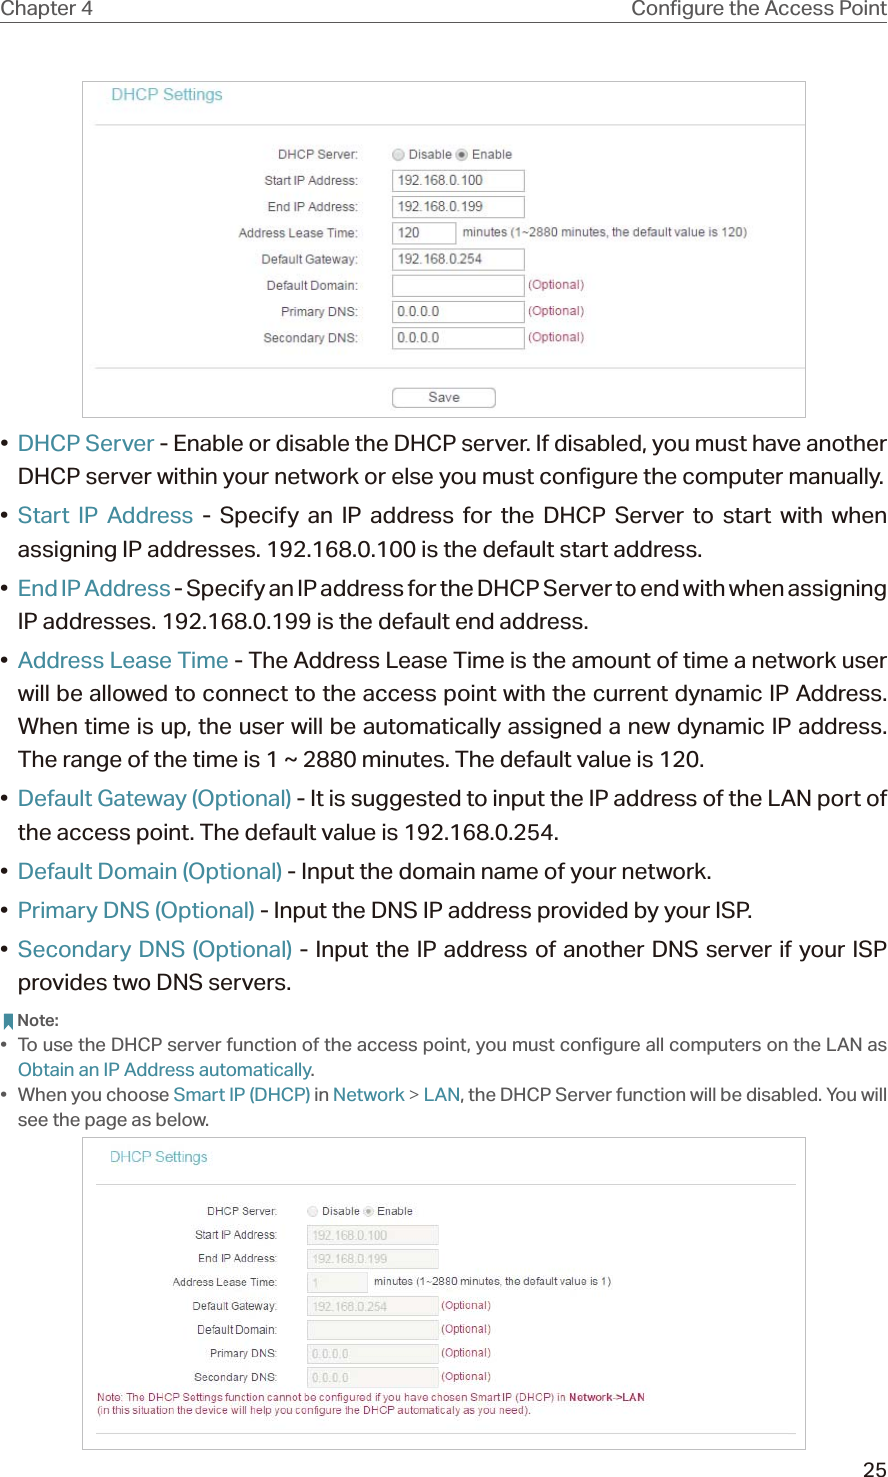 25Chapter 4 •  DHCP Server - Enable or disable the DHCP server. If disabled, you must have another DHCP server within your network or else you must configure the computer manually.•  Start IP Address - Specify an IP address for the DHCP Server to start with when assigning IP addresses. 192.168.0.100 is the default start address.•  End IP Address - Specify an IP address for the DHCP Server to end with when assigning IP addresses. 192.168.0.199 is the default end address.•  Address Lease Time - The Address Lease Time is the amount of time a network user will be allowed to connect to the access point with the current dynamic IP Address. When time is up, the user will be automatically assigned a new dynamic IP address. The range of the time is 1 ~ 2880 minutes. The default value is 120.•  Default Gateway (Optional) - It is suggested to input the IP address of the LAN port of the access point. The default value is 192.168.0.254.•  Default Domain (Optional) - Input the domain name of your network.•  Primary DNS (Optional) - Input the DNS IP address provided by your ISP.•  Secondary DNS (Optional) - Input the IP address of another DNS server if your ISP provides two DNS servers. Note:•  To use the DHCP server function of the access point, you must configure all computers on the LAN as Obtain an IP Address automatically.•  When you choose Smart IP (DHCP) in Network &gt; LAN, the DHCP Server function will be disabled. You will see the page as below.